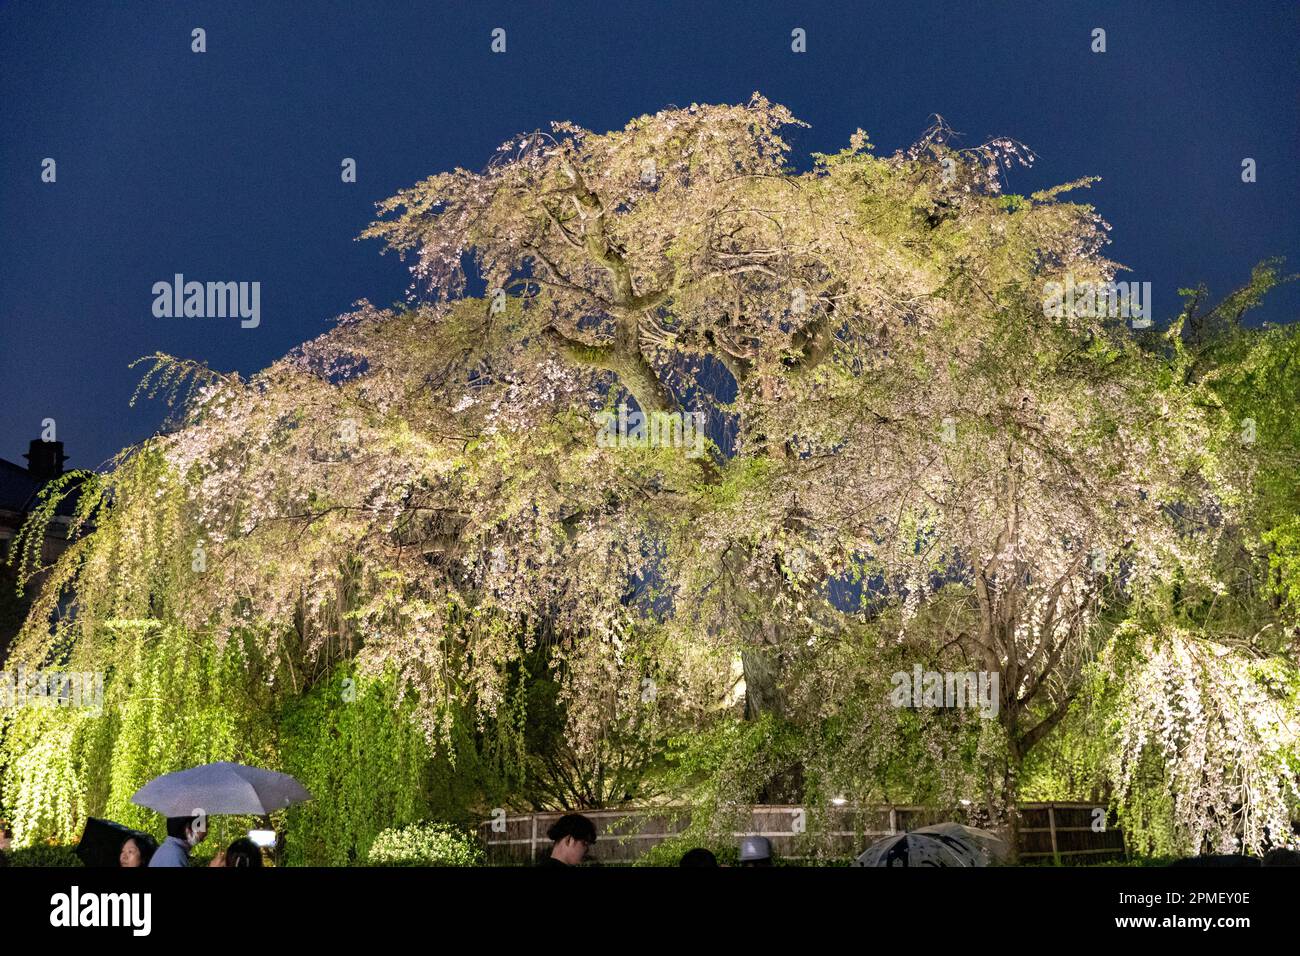 Kyoto Japan spring cherry blossoms flowering, night time cherry blossom sakura weeping cherry tree is illuminated in Kyoto downtown area, Japan,Asia Stock Photo